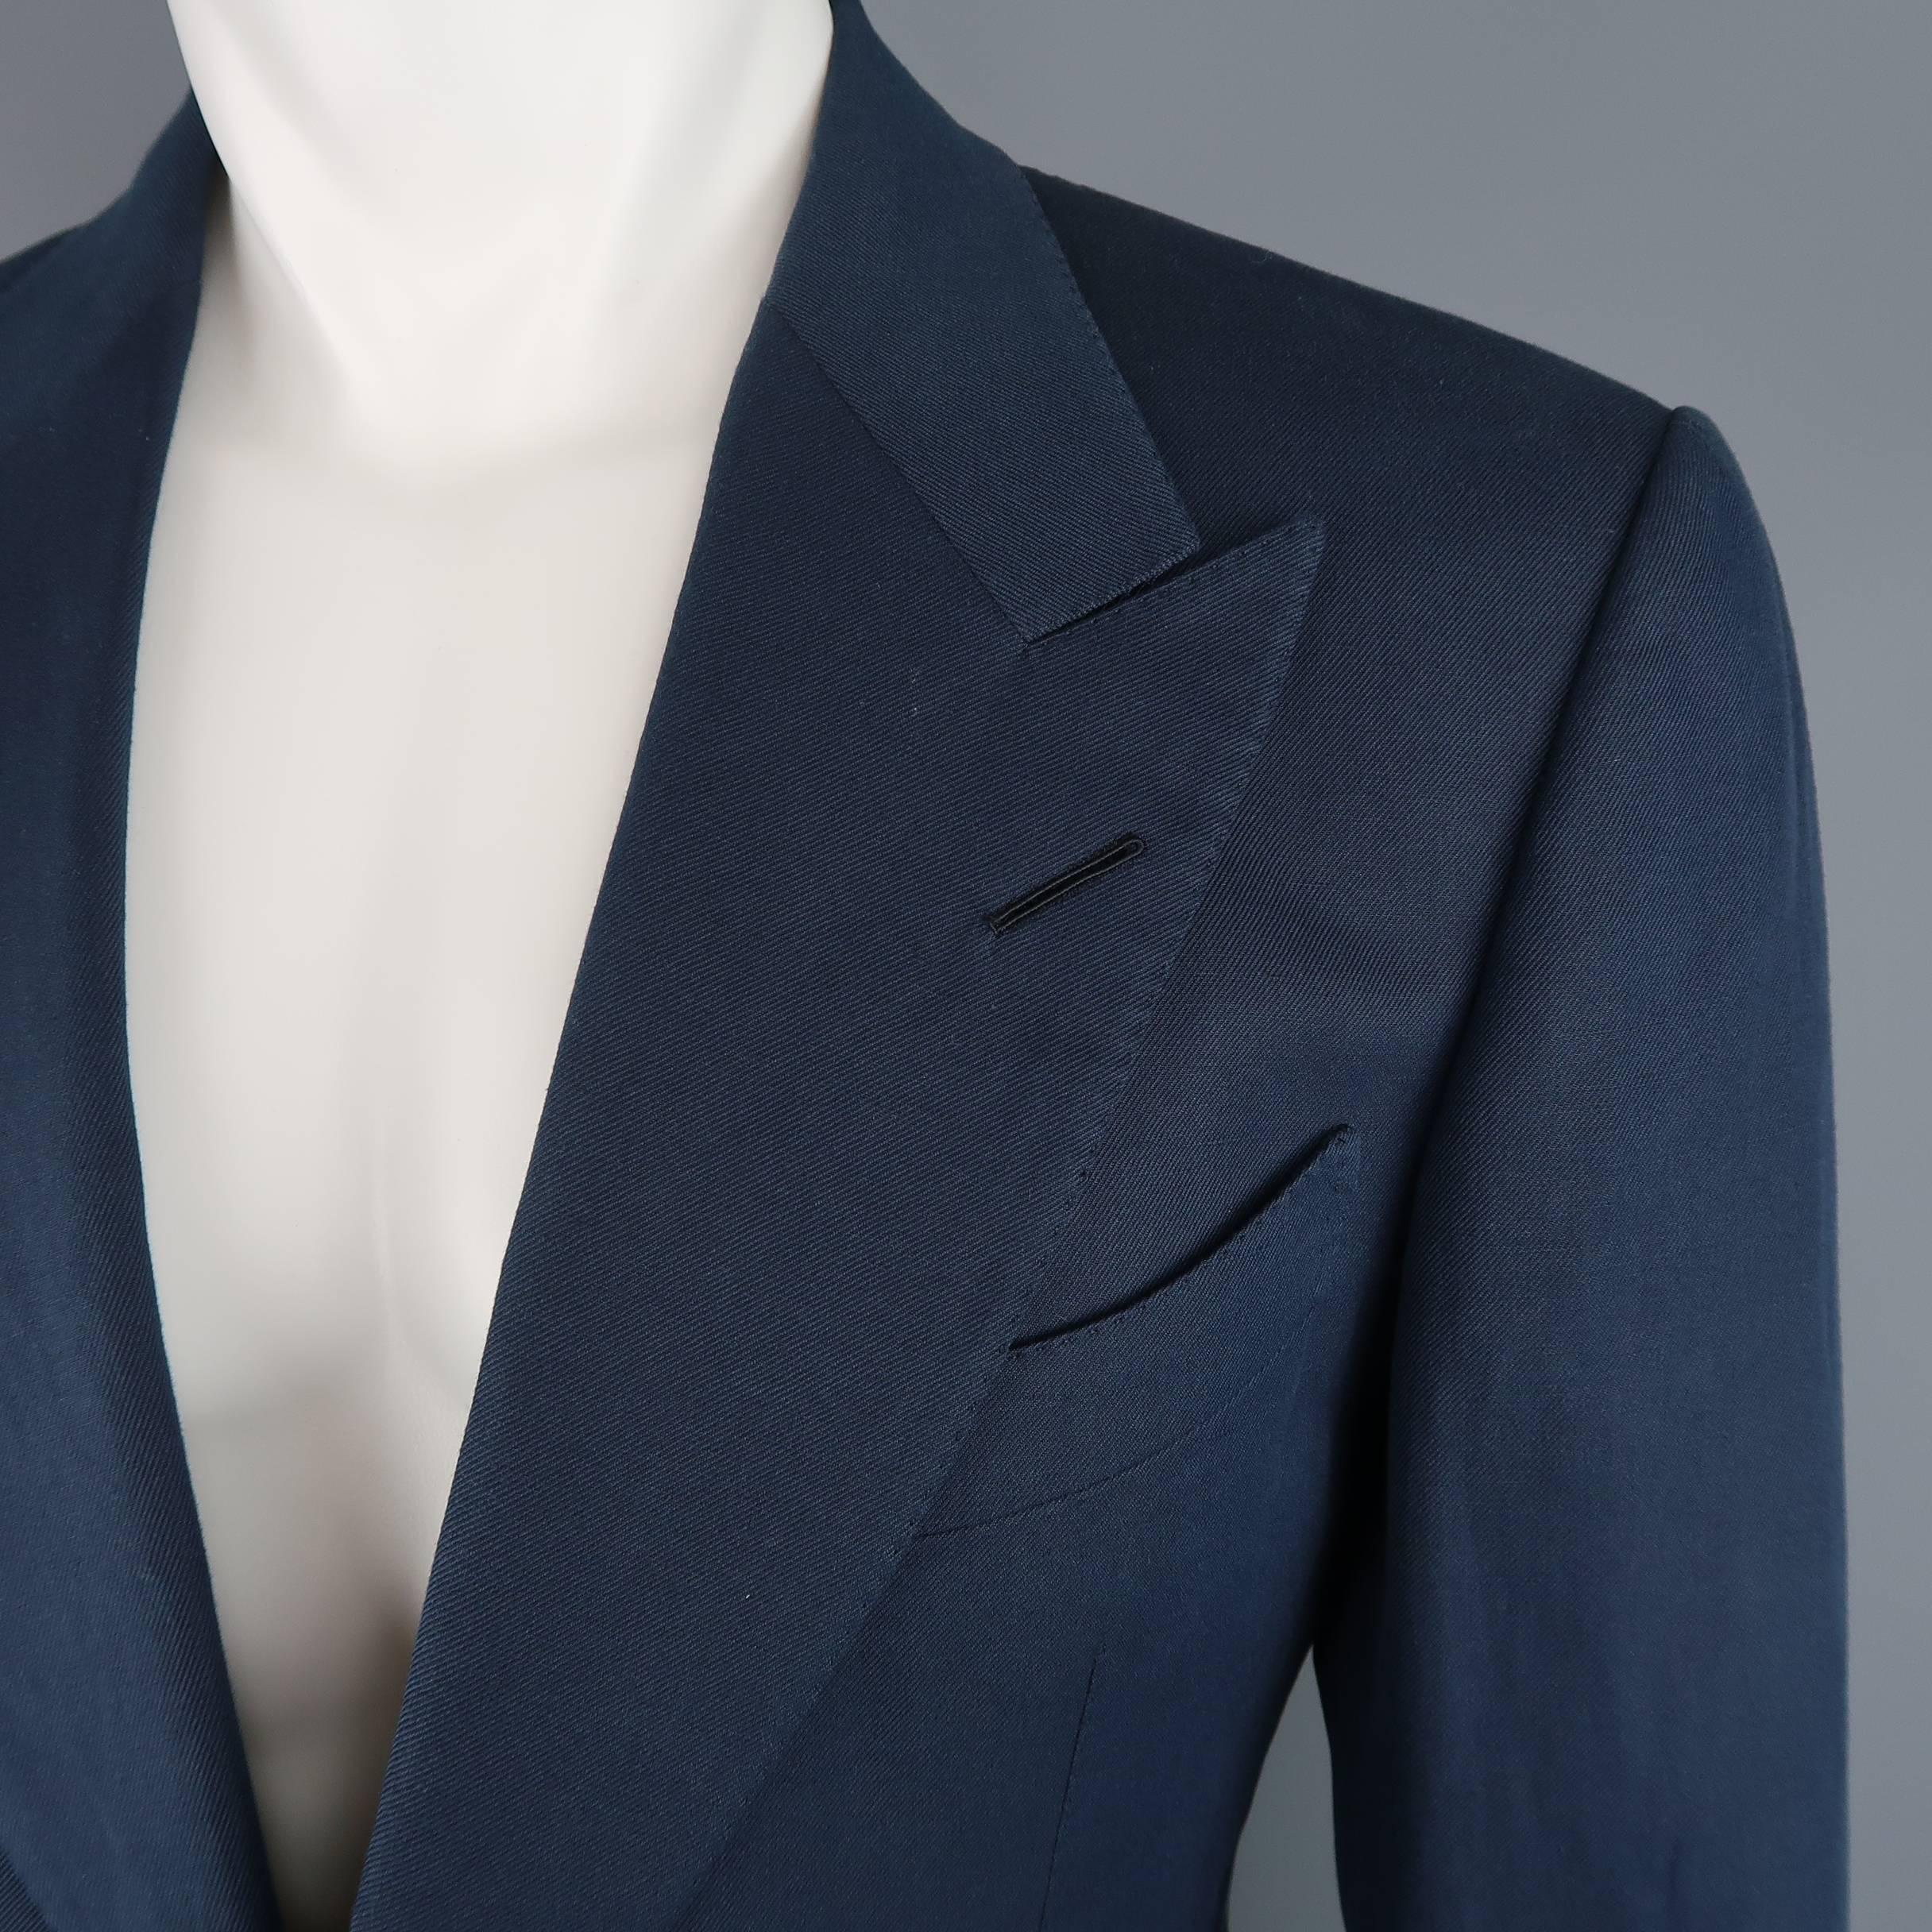 TOM FORD single breasted sport coat comes in light weight navy blue cotton twill with a peak lapel, two button front, patch pockets, functional button cuffs, and double vented back.  Made in Switzerland.

Excellent Condition.  Marked: IT 50 R
